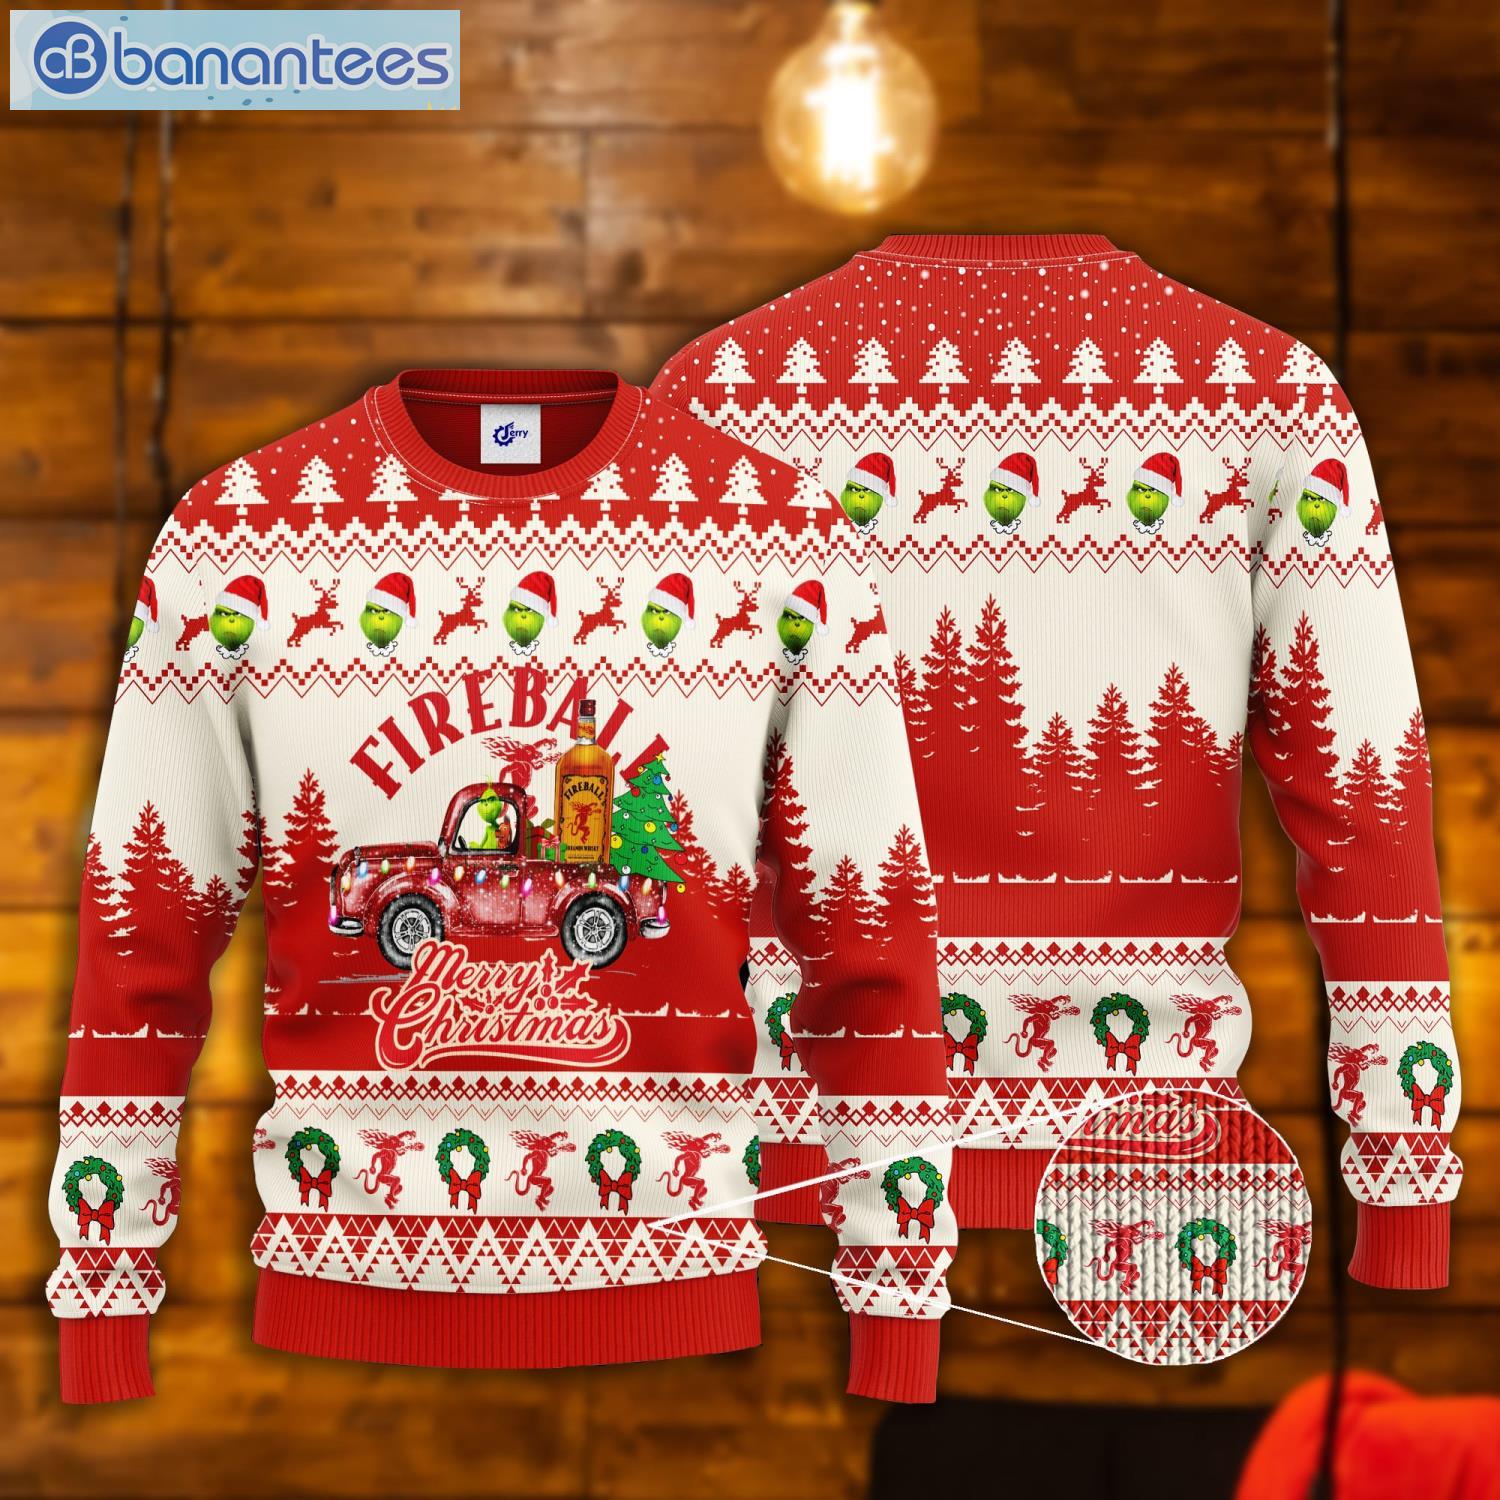 NHL Boston Bruins Funny Grinch Christmas Ugly 3D Sweater For Men And Women  Gift Ugly Christmas - Banantees